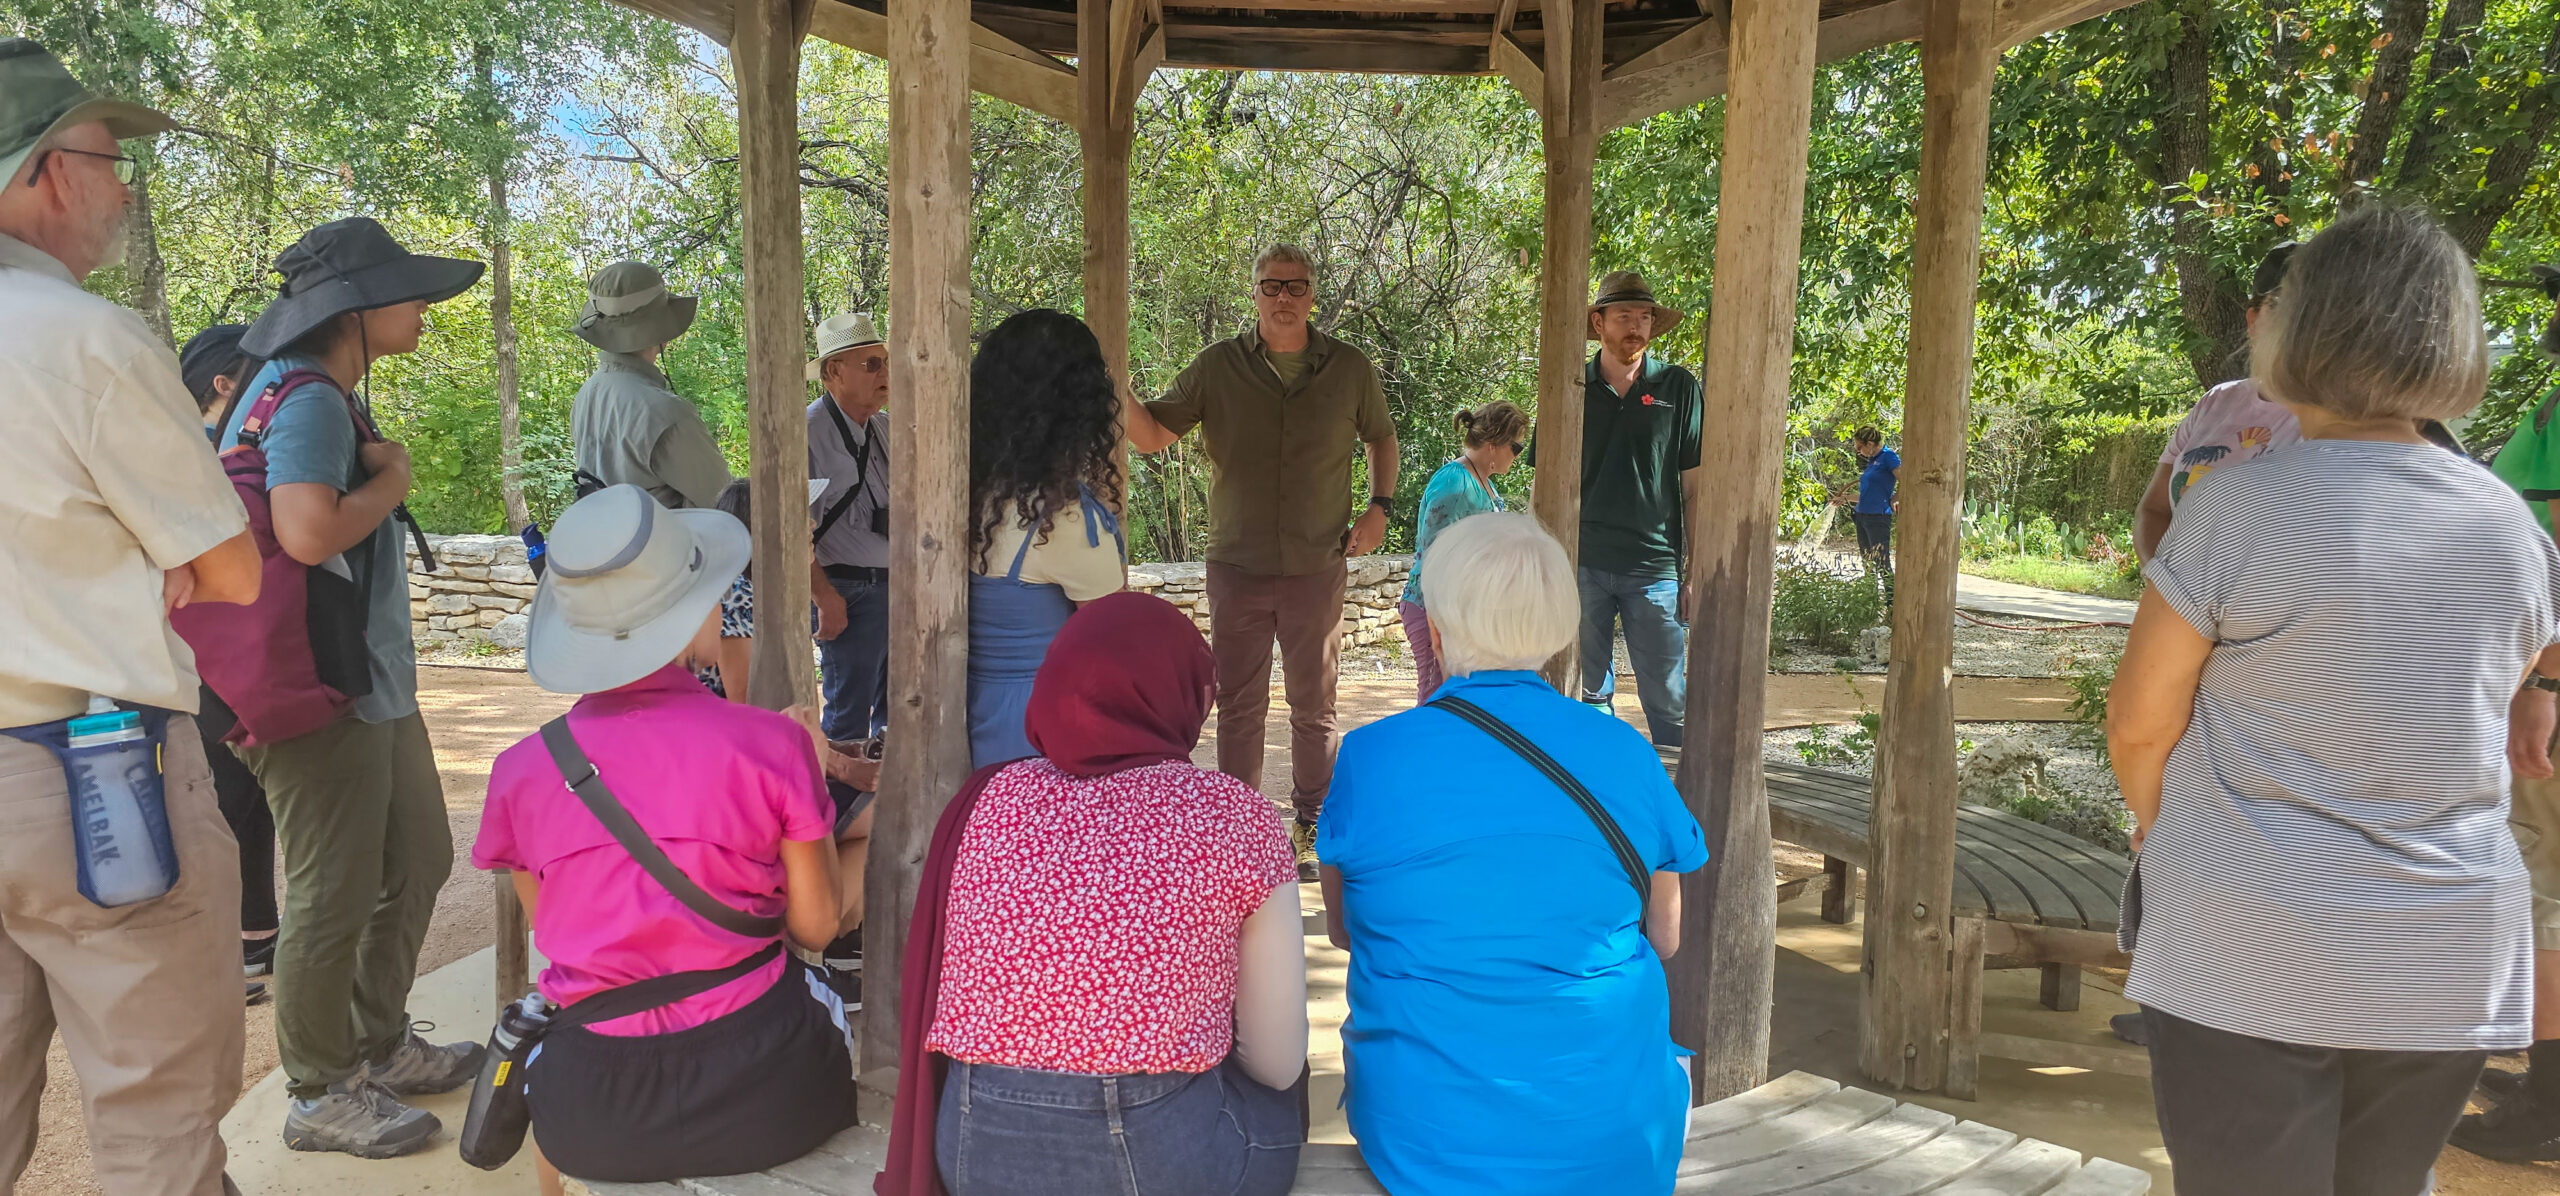 A group of people are gathered under an outdoor gazebo, listening intently to a discussion about Texas native plants led by a man in a green shirt.